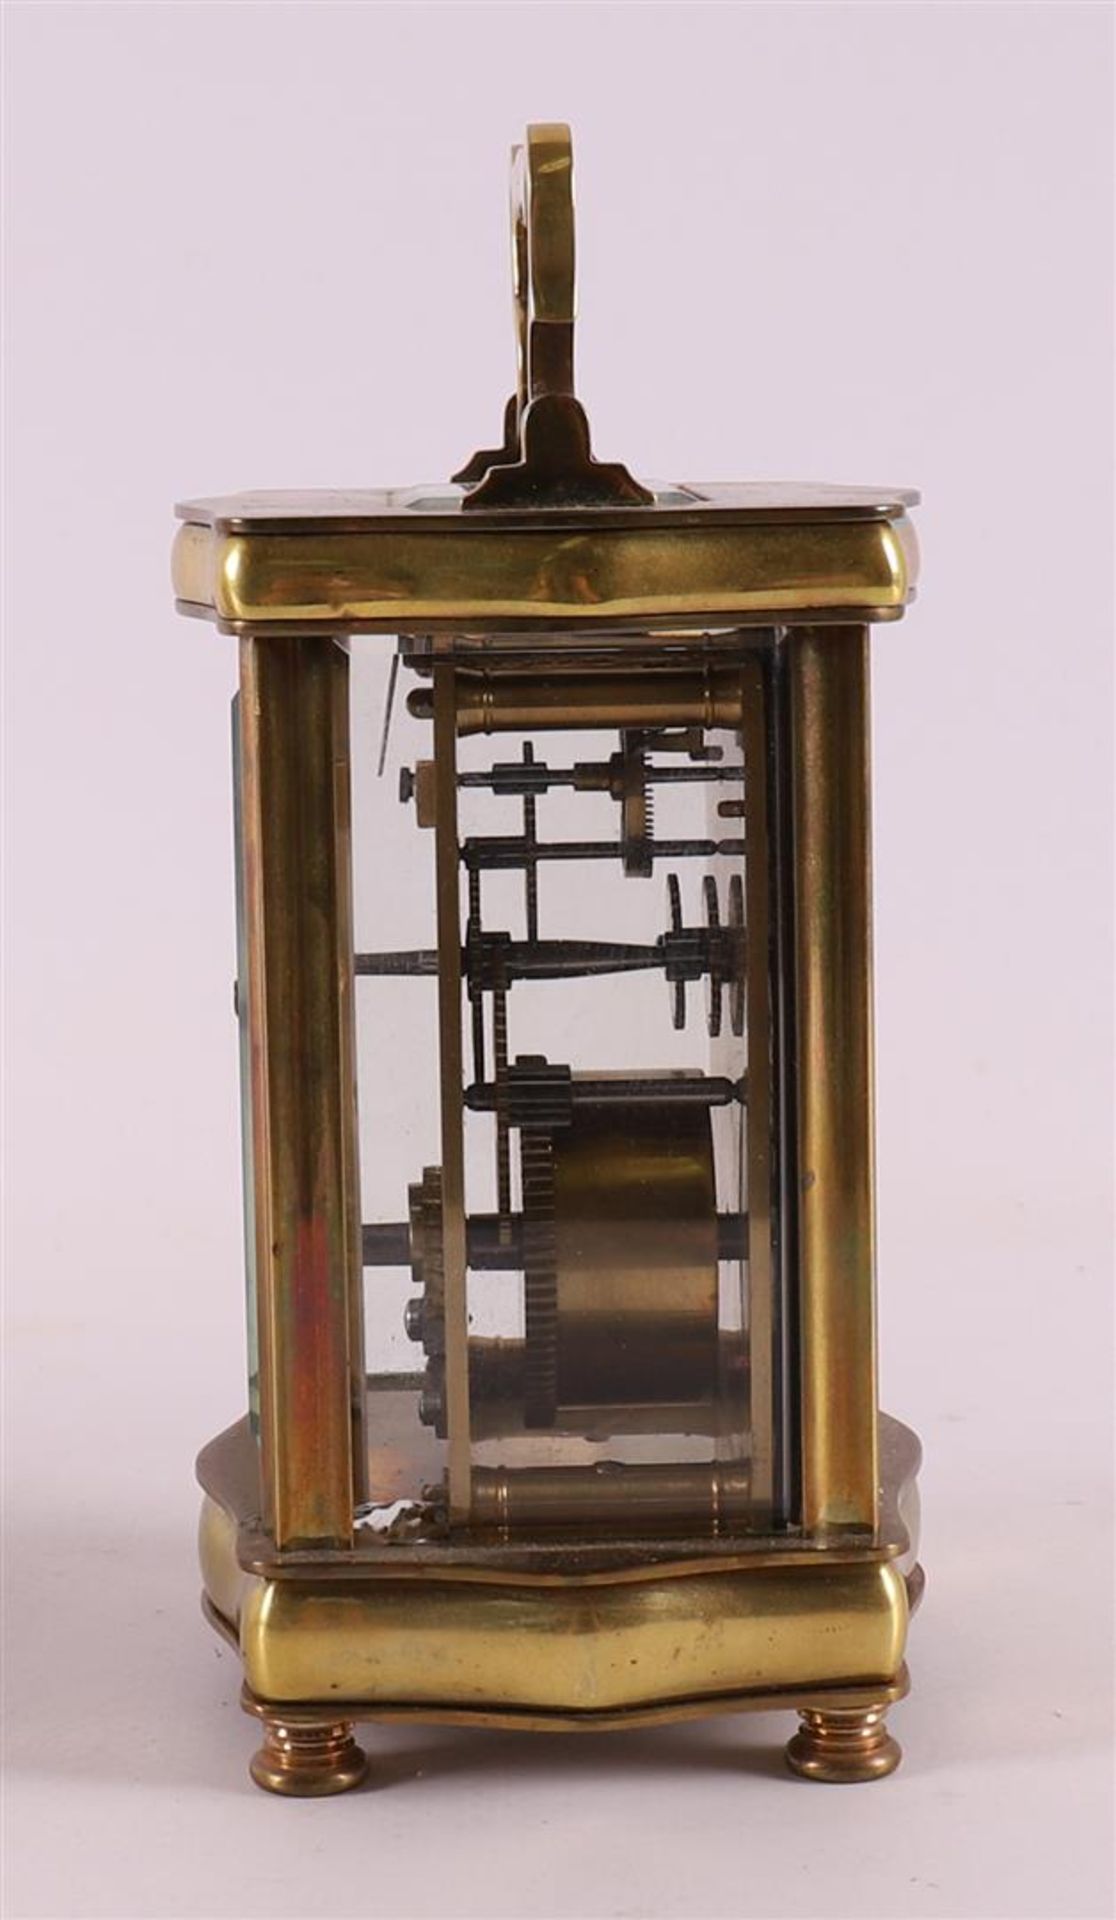 A travel clock in brass housing and original case, France, - Image 4 of 8